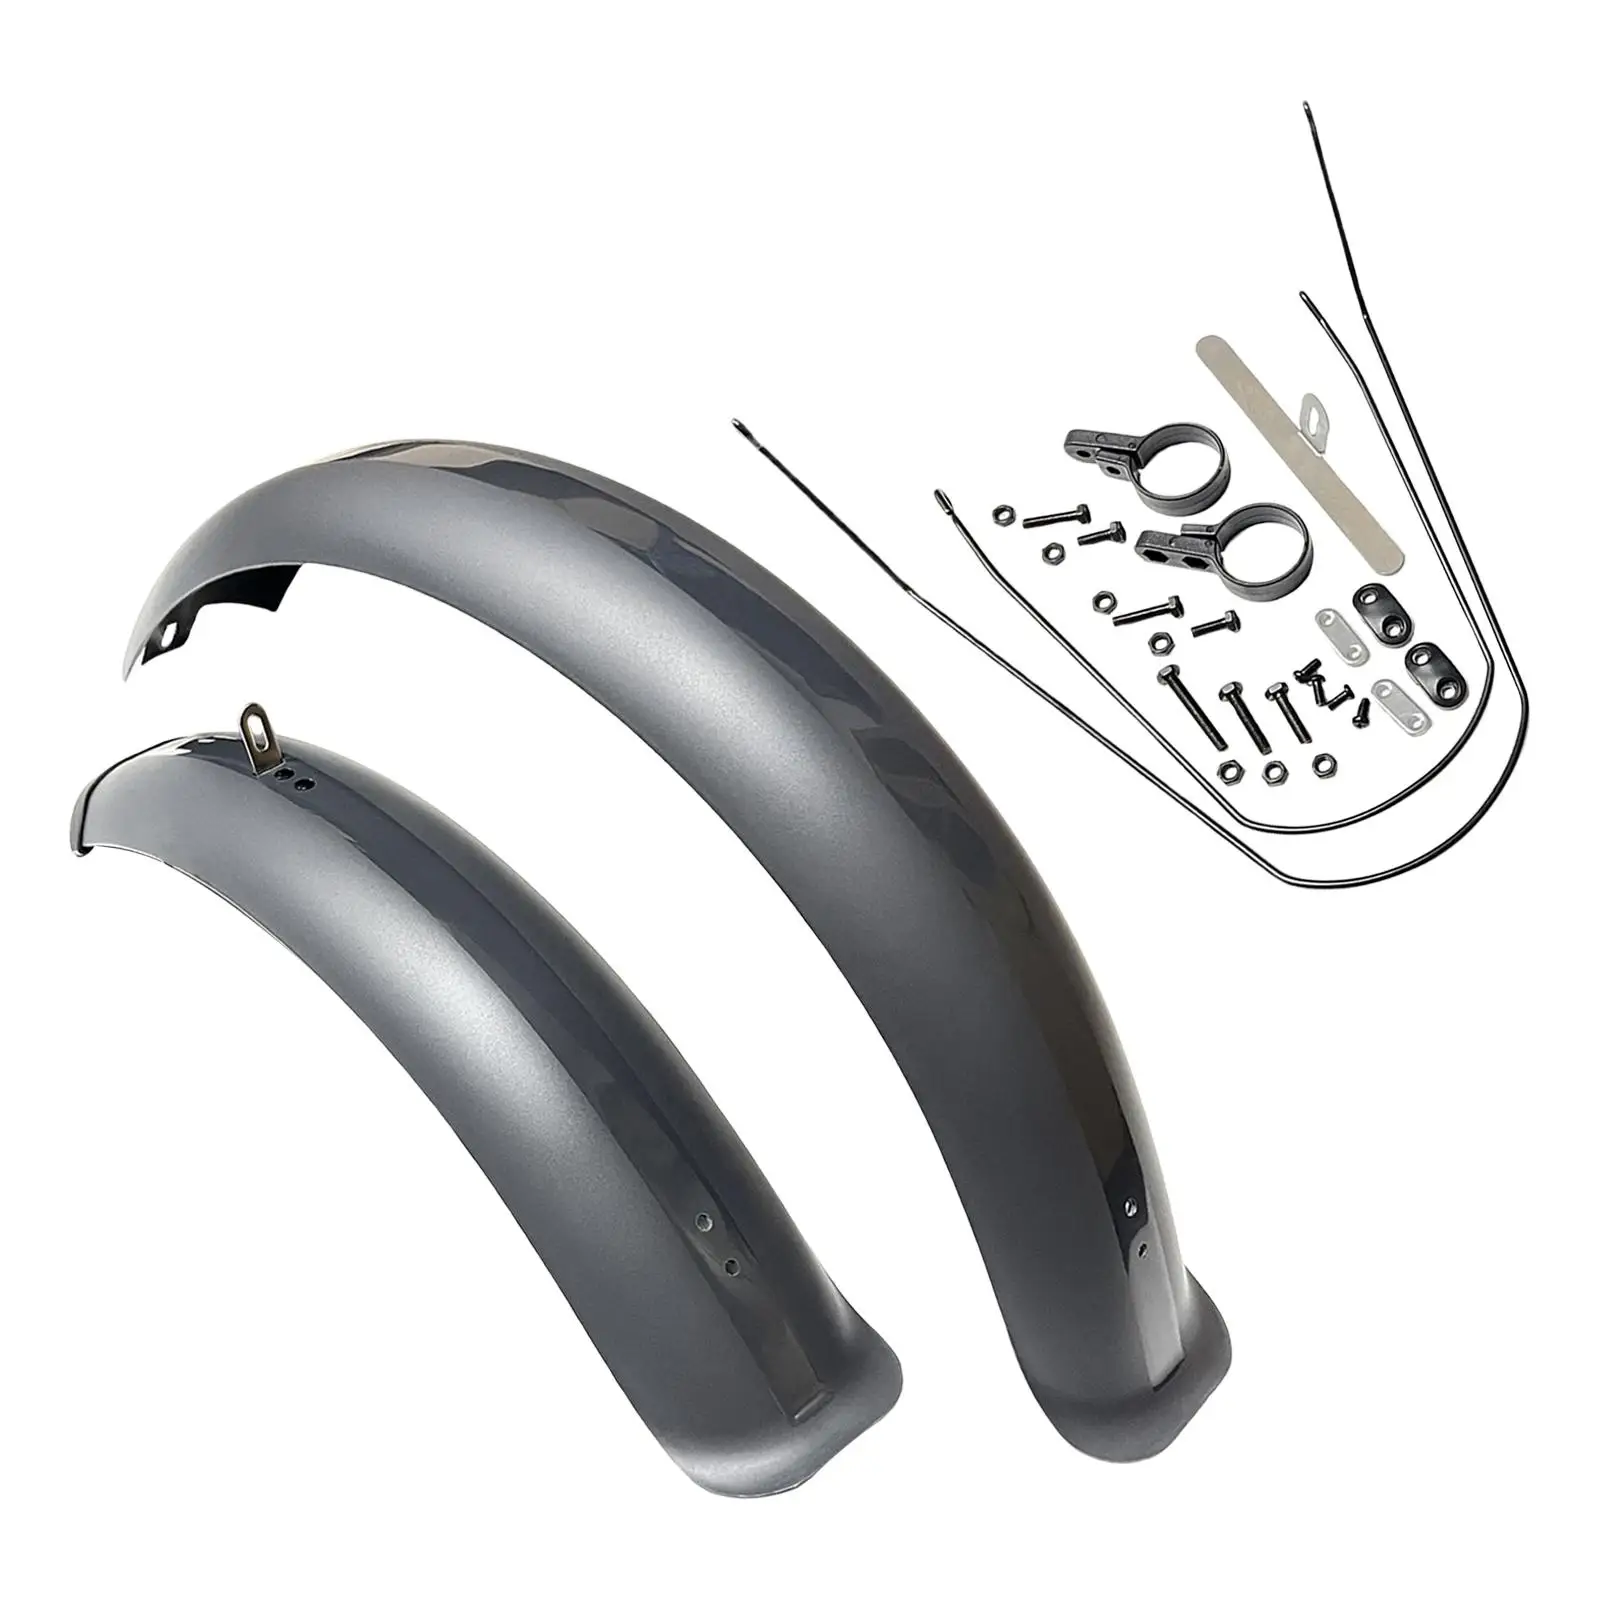 Bike Mudguard Front Rear Set Easy to Install Supplies Accs for Mountain Bike